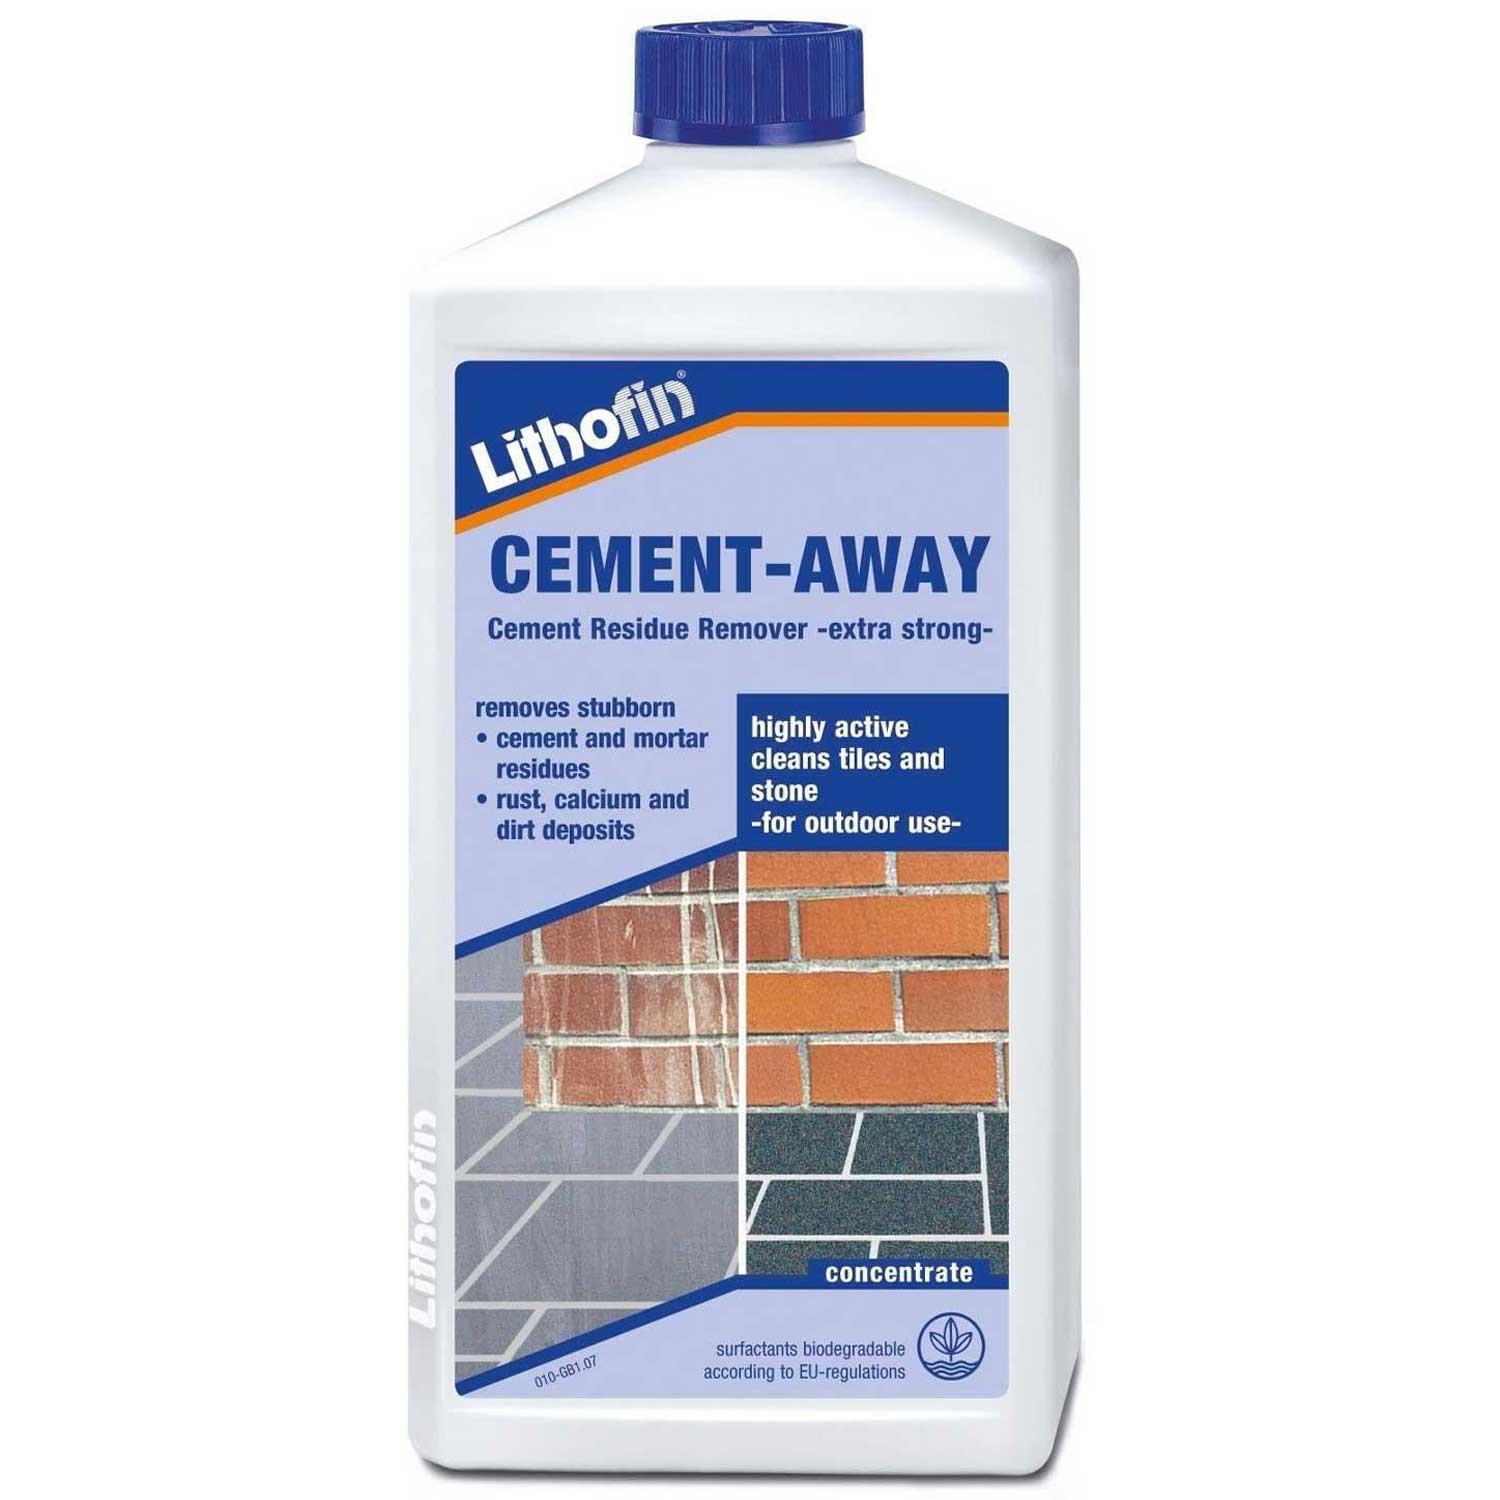 Lithofin Cement Away 1Ltr Cement Residue Remover